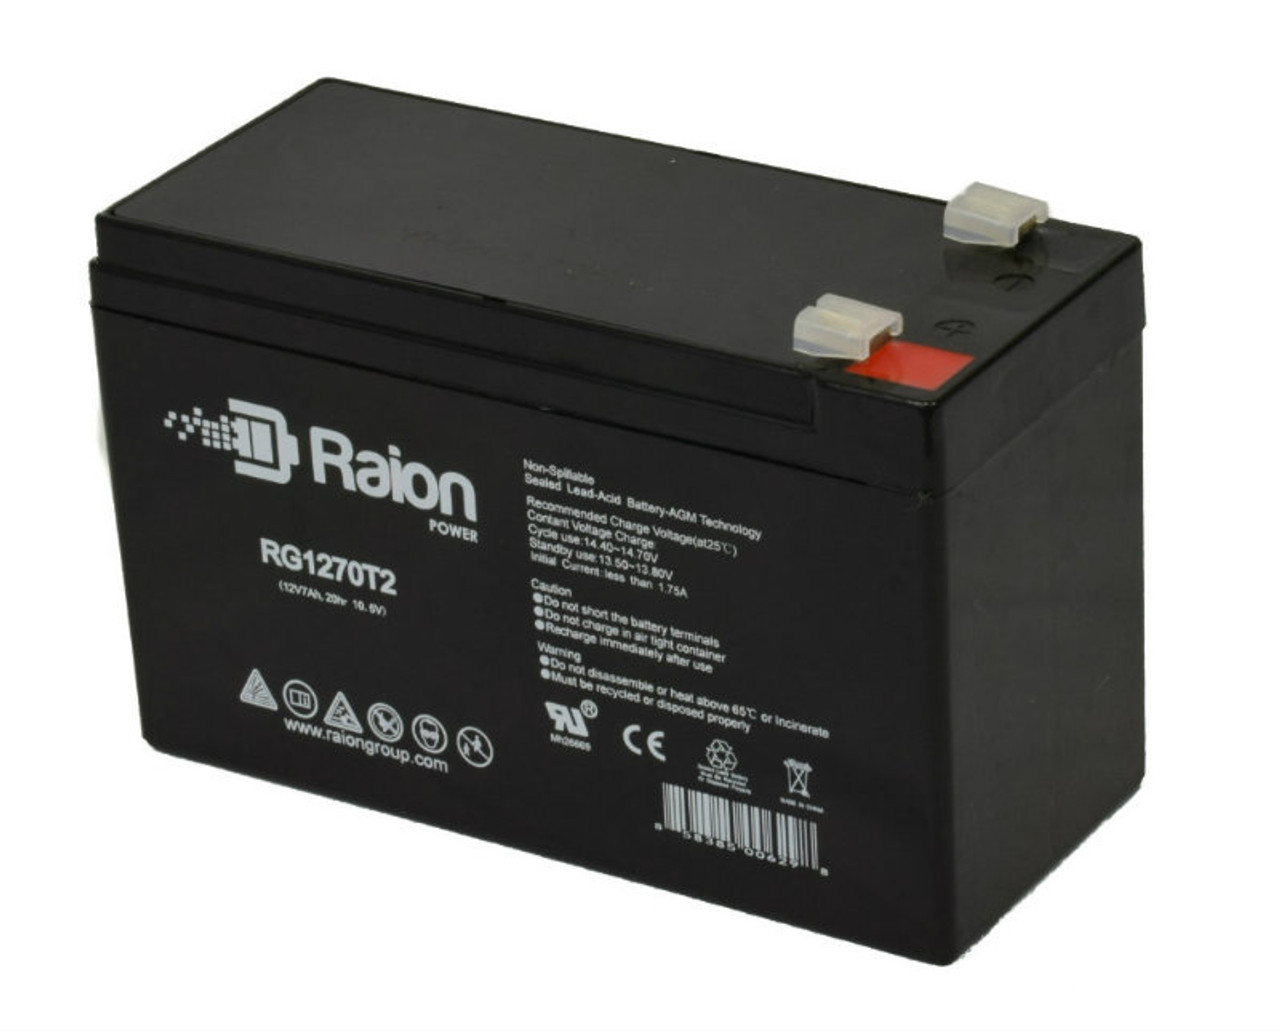 Raion Power Replacement 12V 7Ah RG1270T1 Fire Alarm Battery for ADT Security Alarm 899953